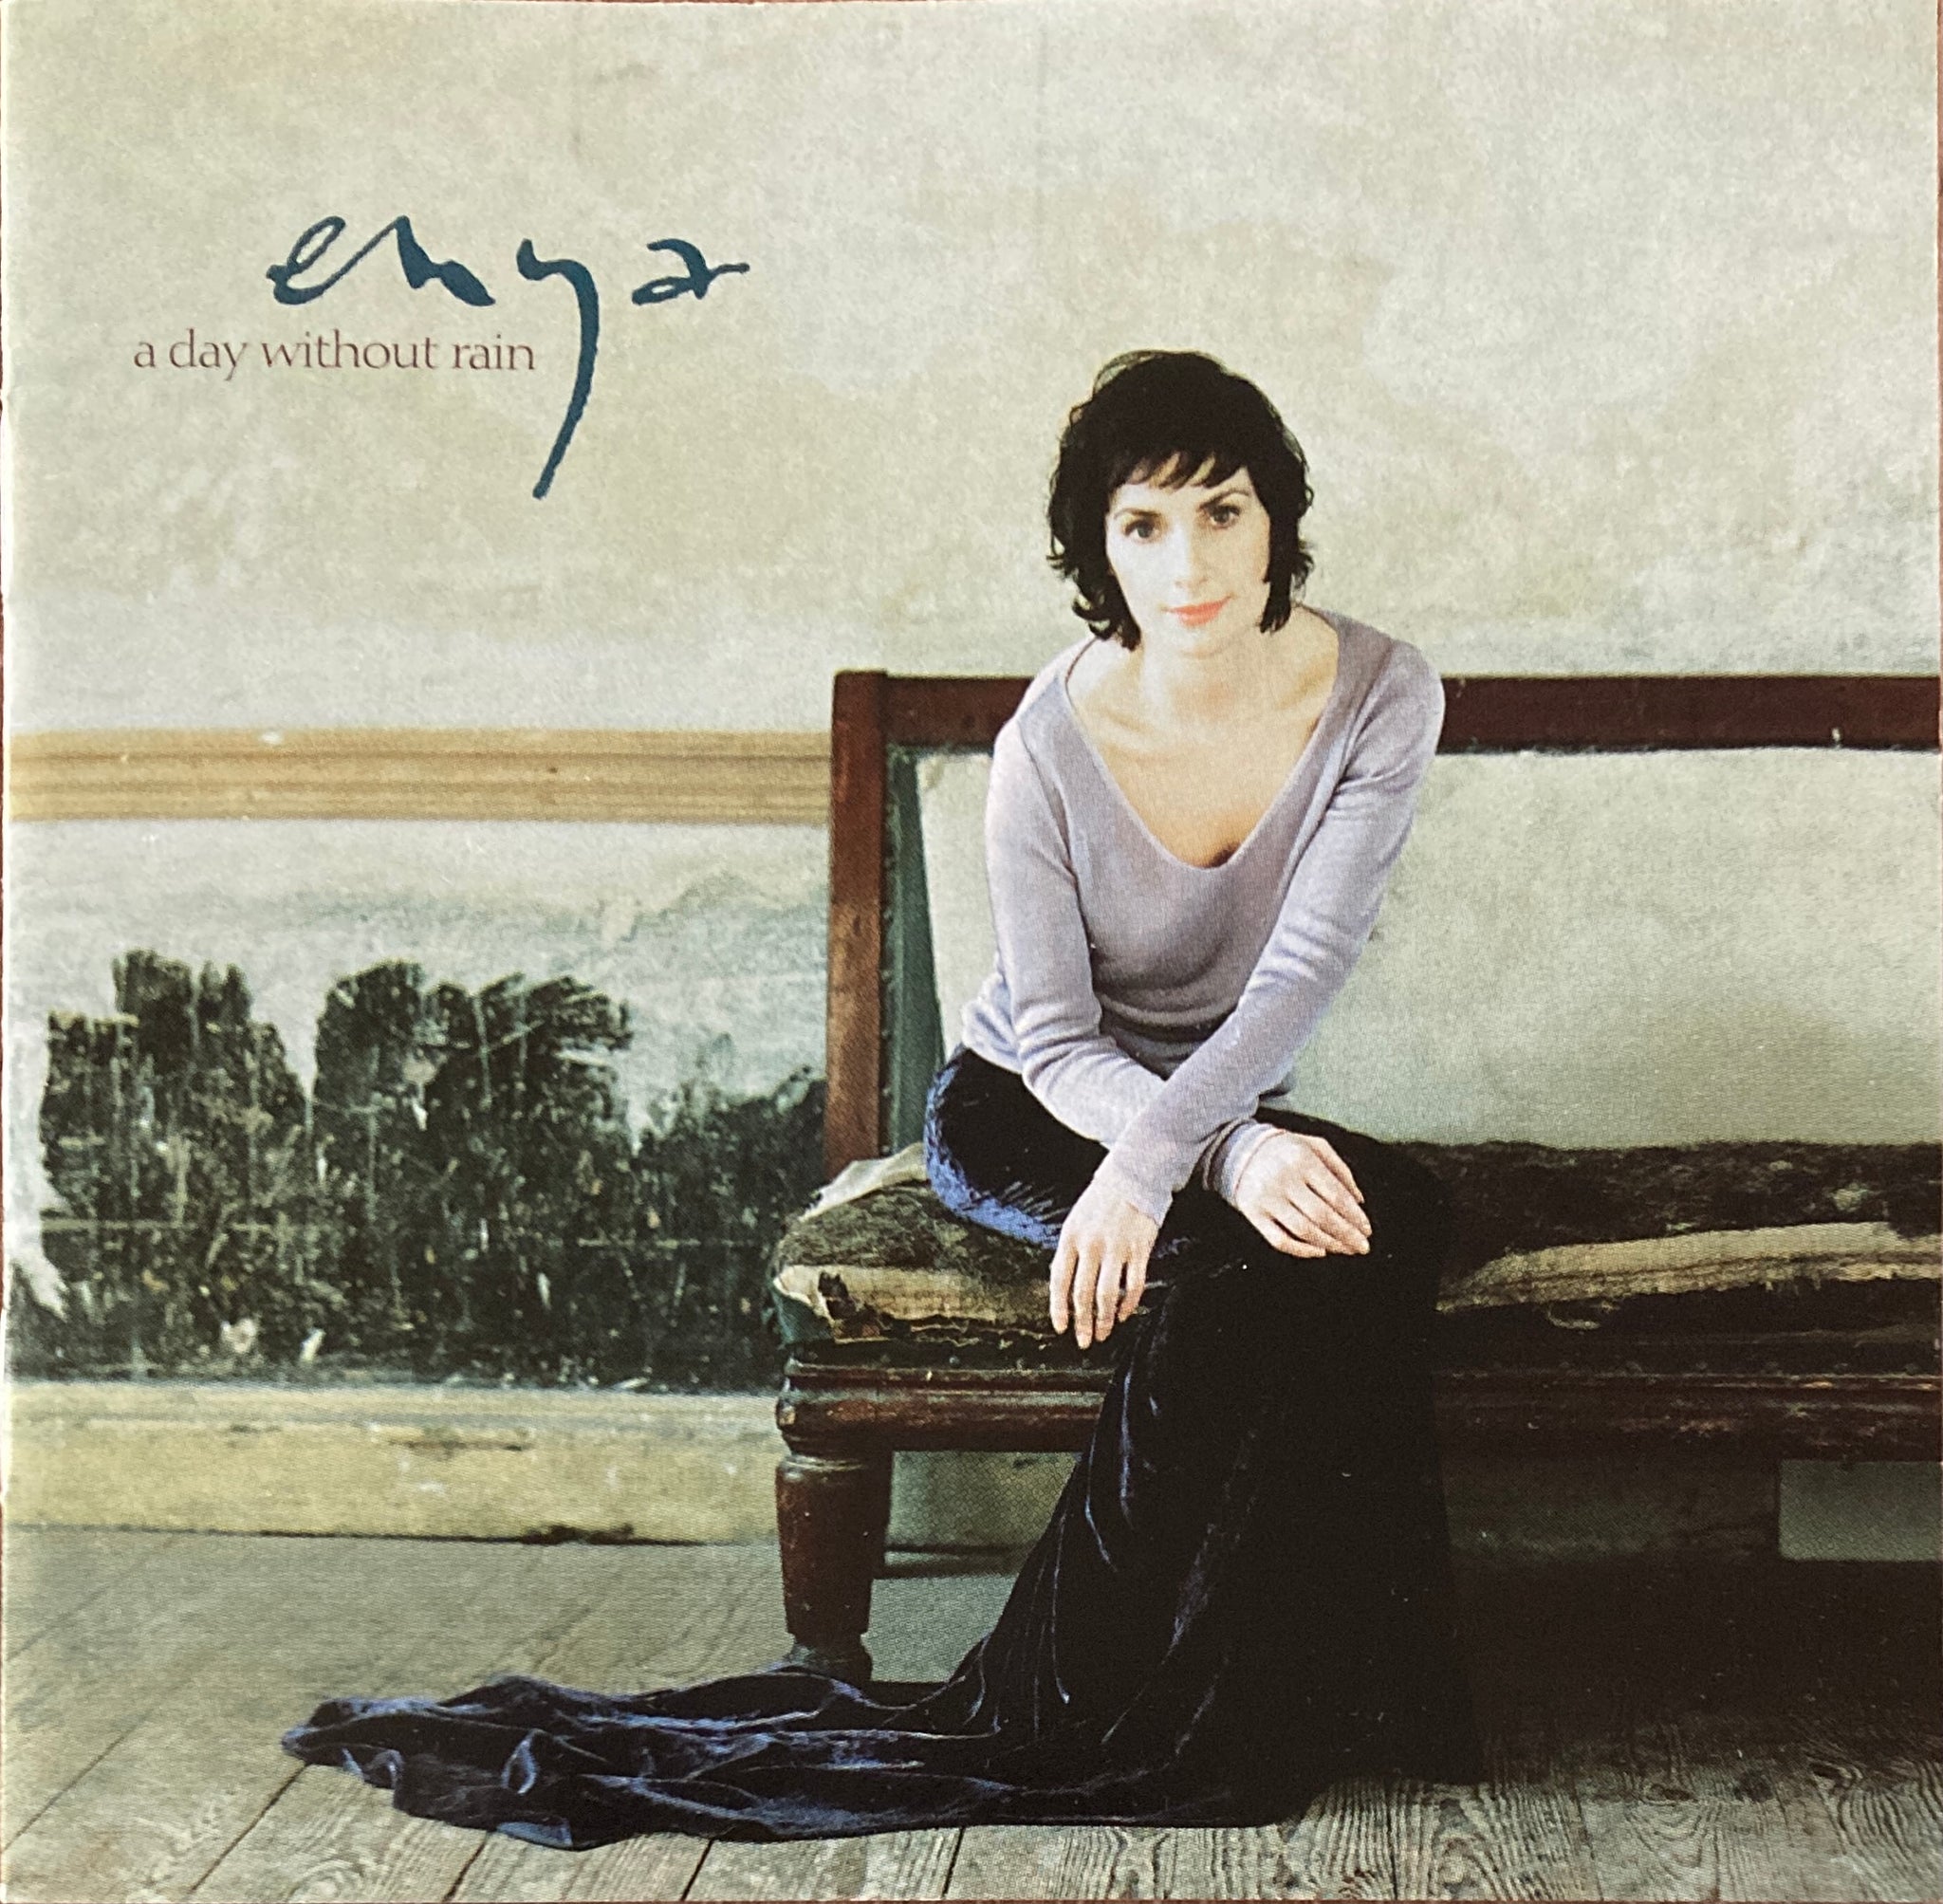 Enya "A Day Without Rain" CD (2000)